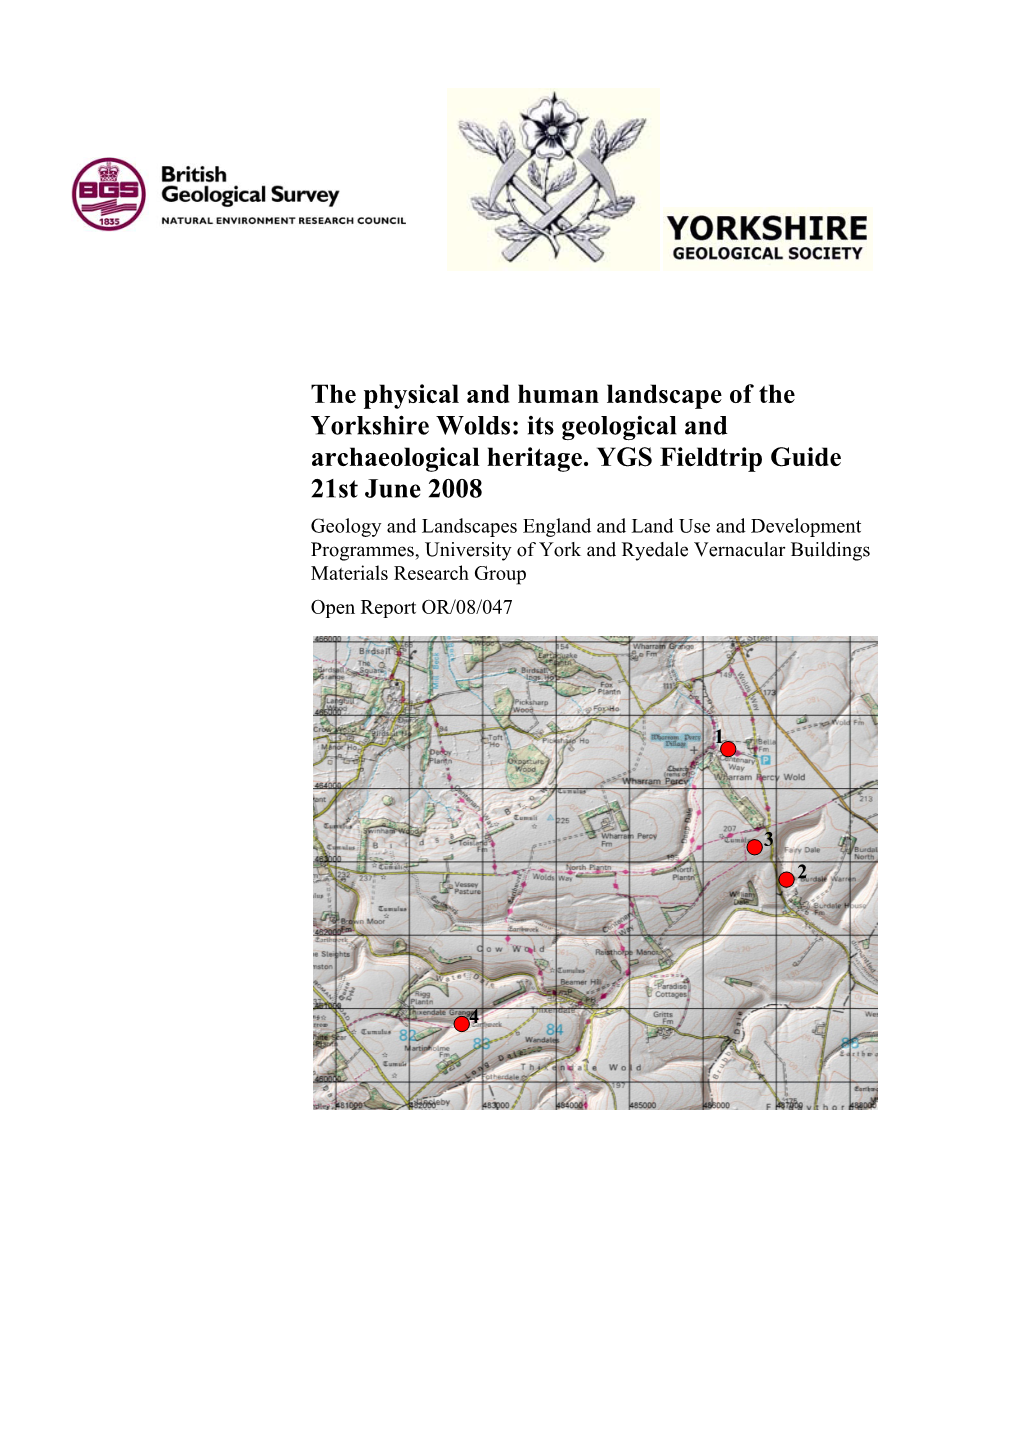 The Physical and Human Landscape of the Yorkshire Wolds: Its Geological and Archaeological Heritage